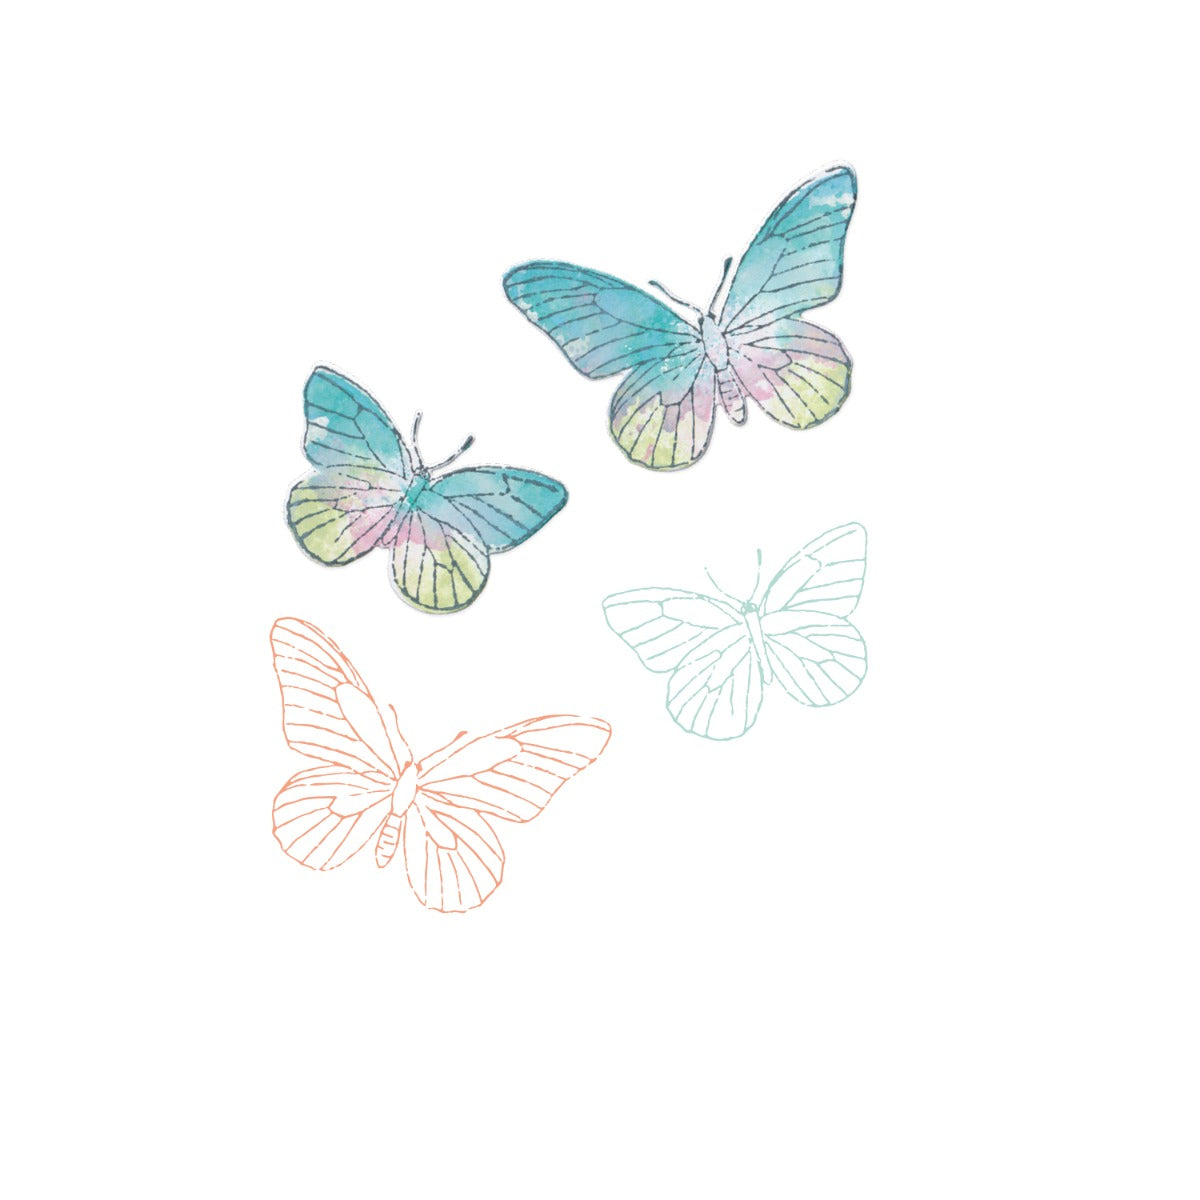 sizzix-a5-clear-stamps-set-8pk-w-2pk-framelits-die-set-painted-pencil-butterflies-by-49-and-market